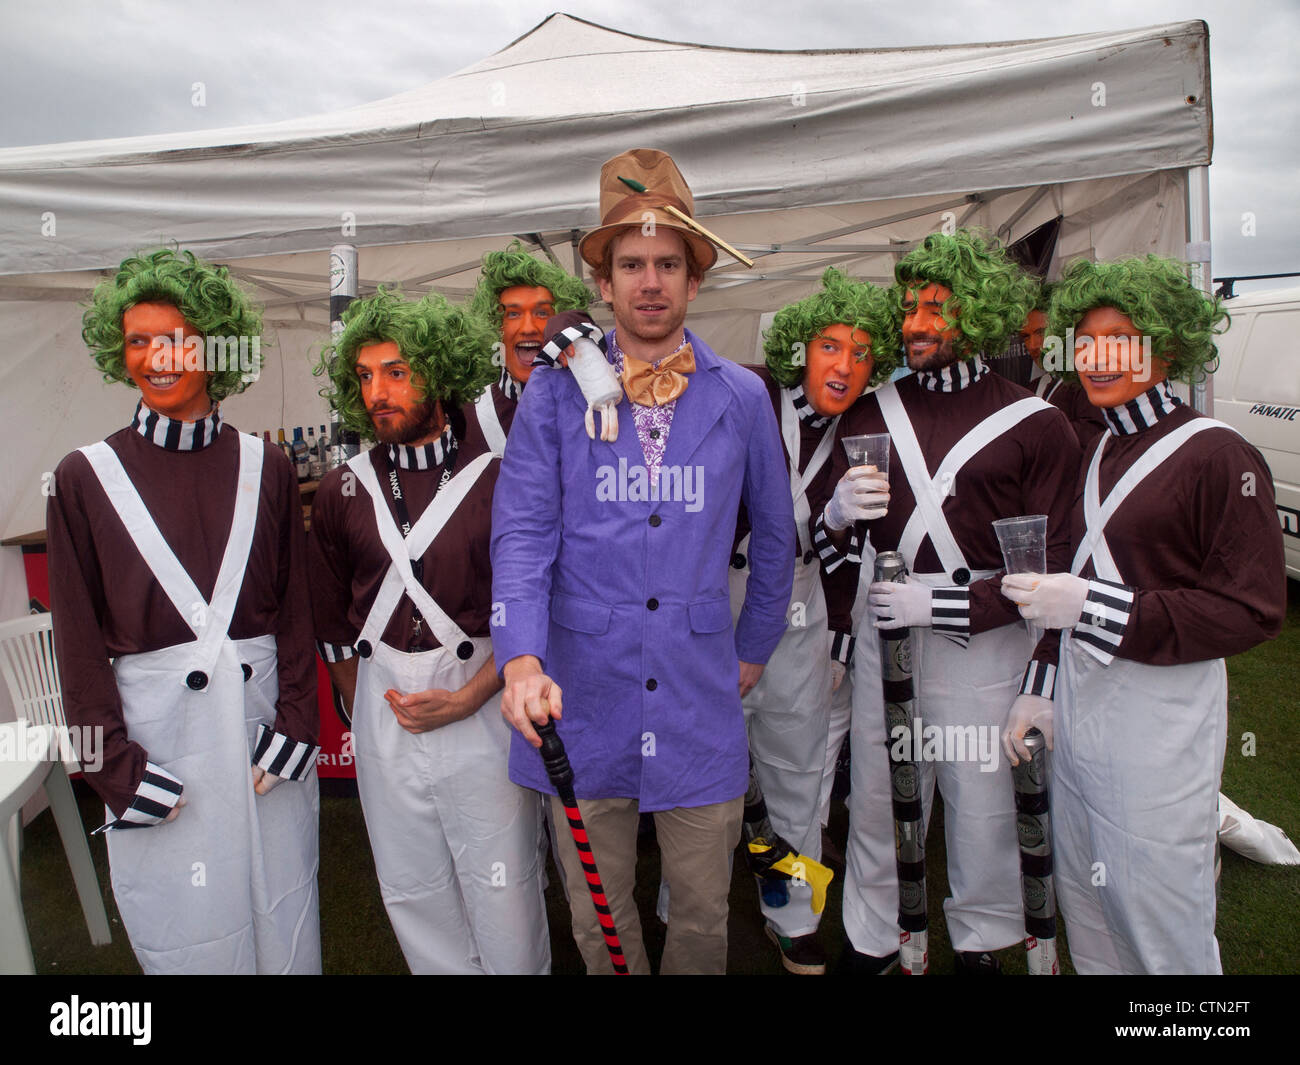 A stag party in Brighton for the weekend,dressed as Willy Wonka and the Oompa-Loompas. Stock Photo